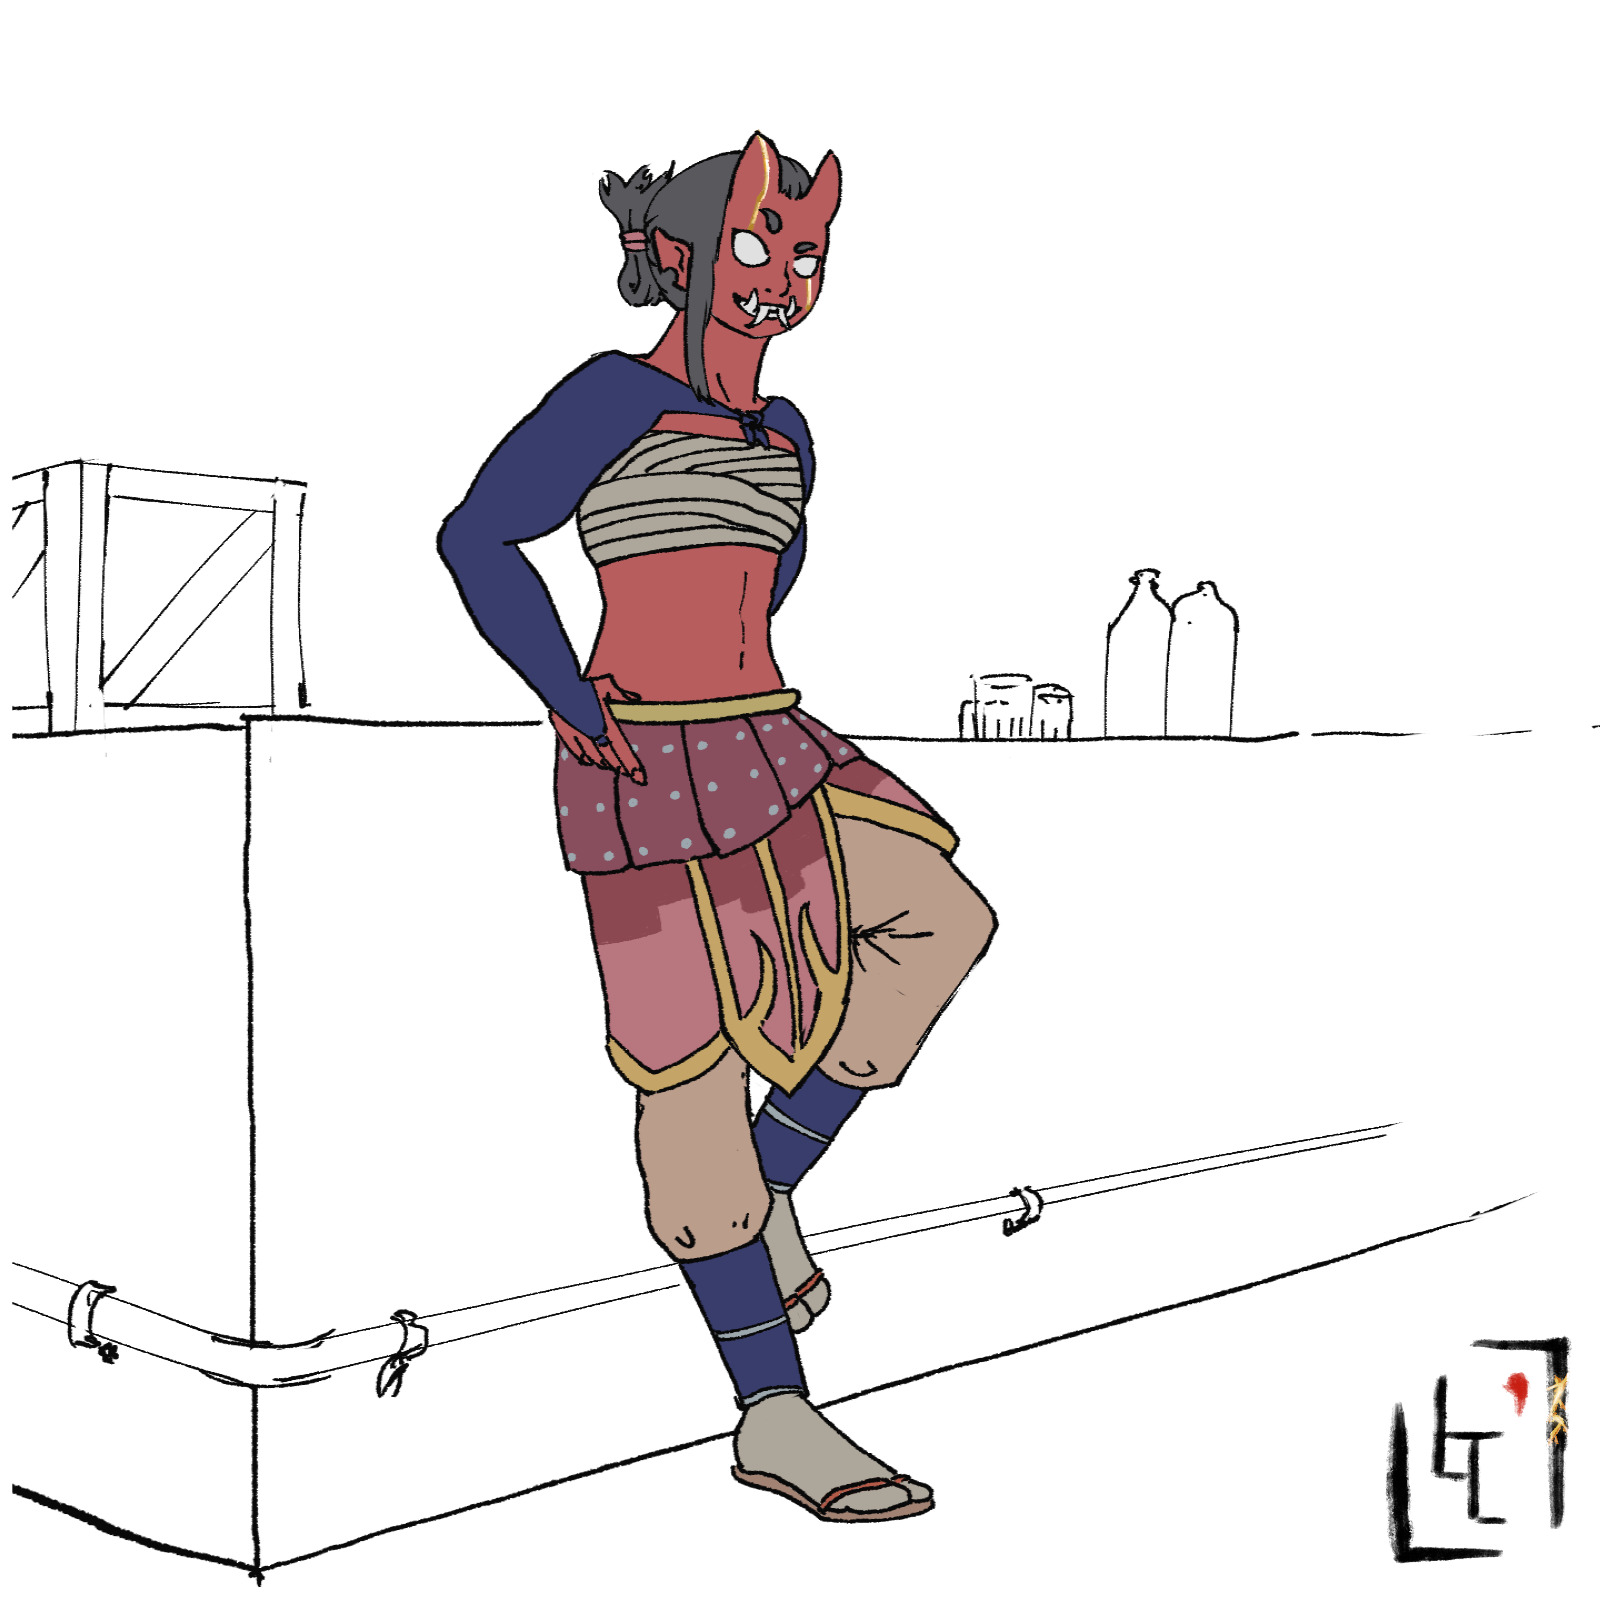 A Tiefling leaning against a bar.